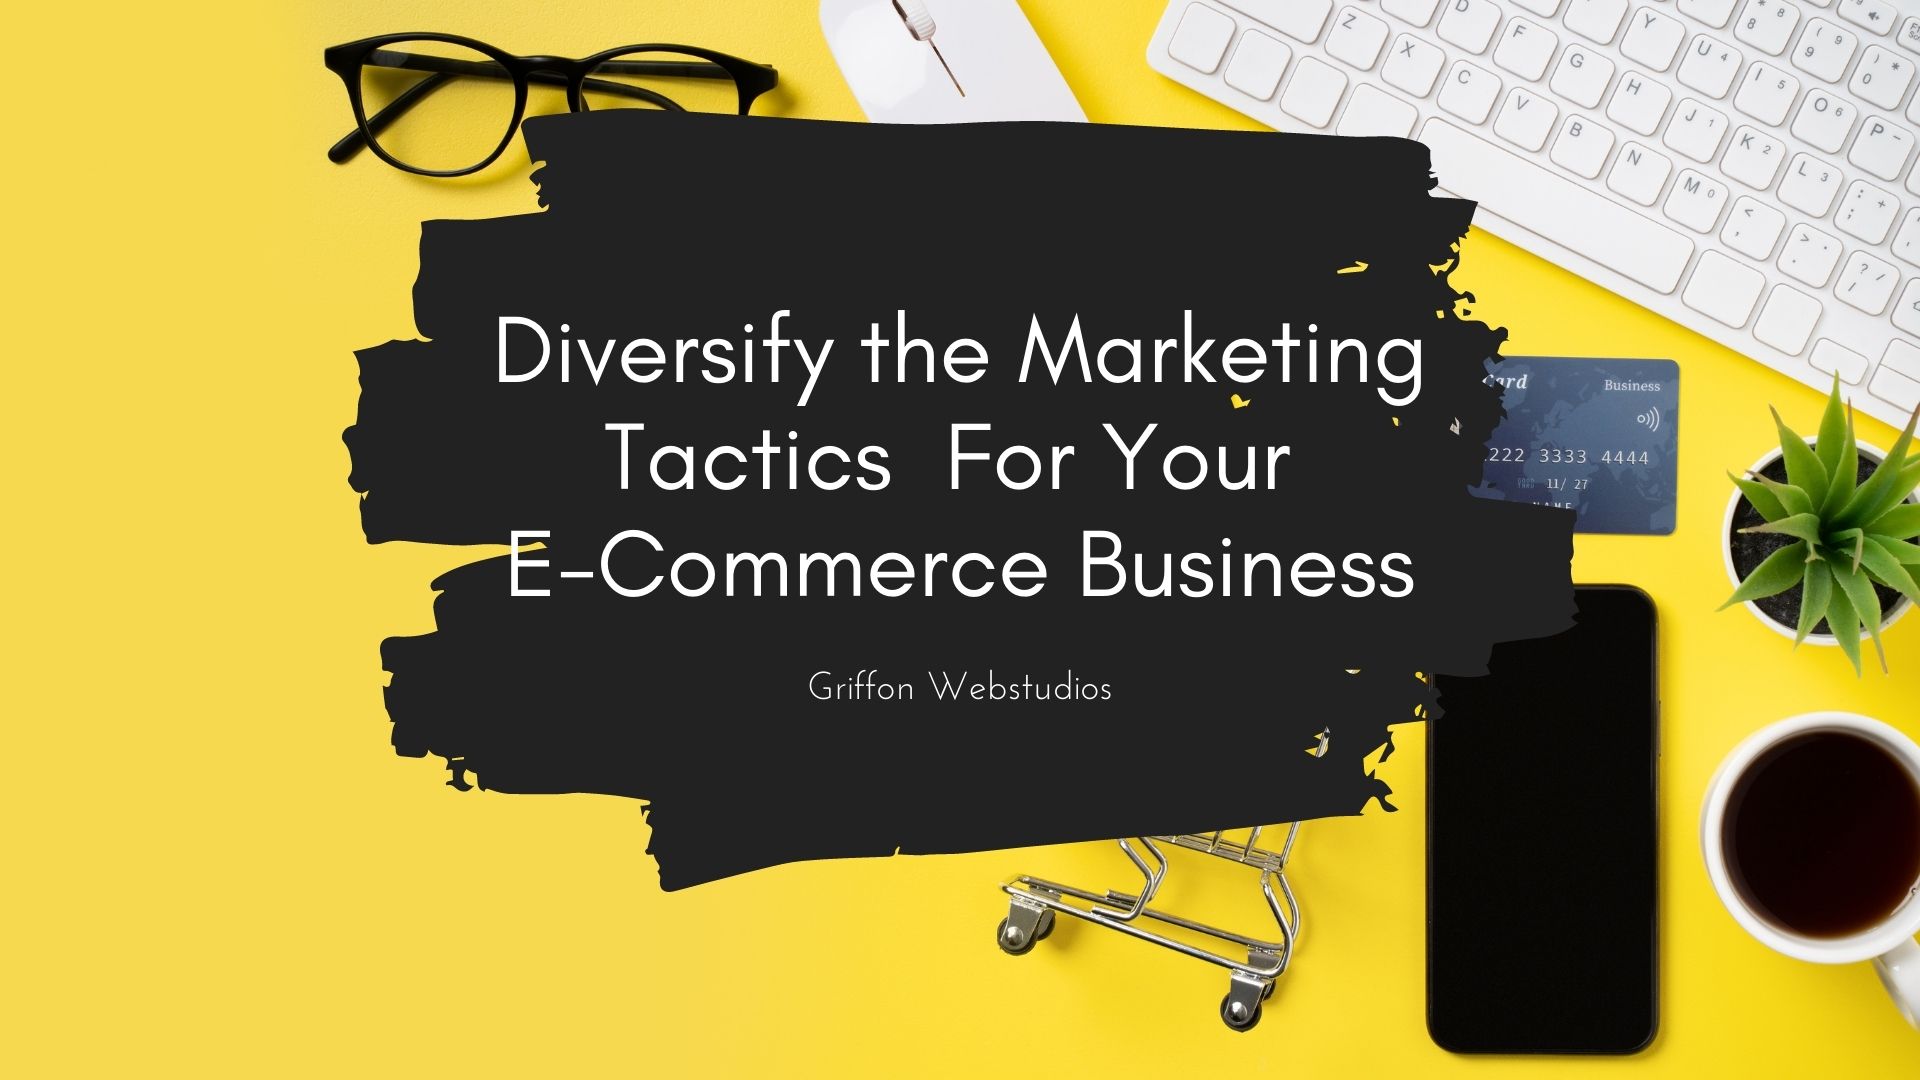 How to Diversify the Marketing Tactics for Your E-Commerce Business?